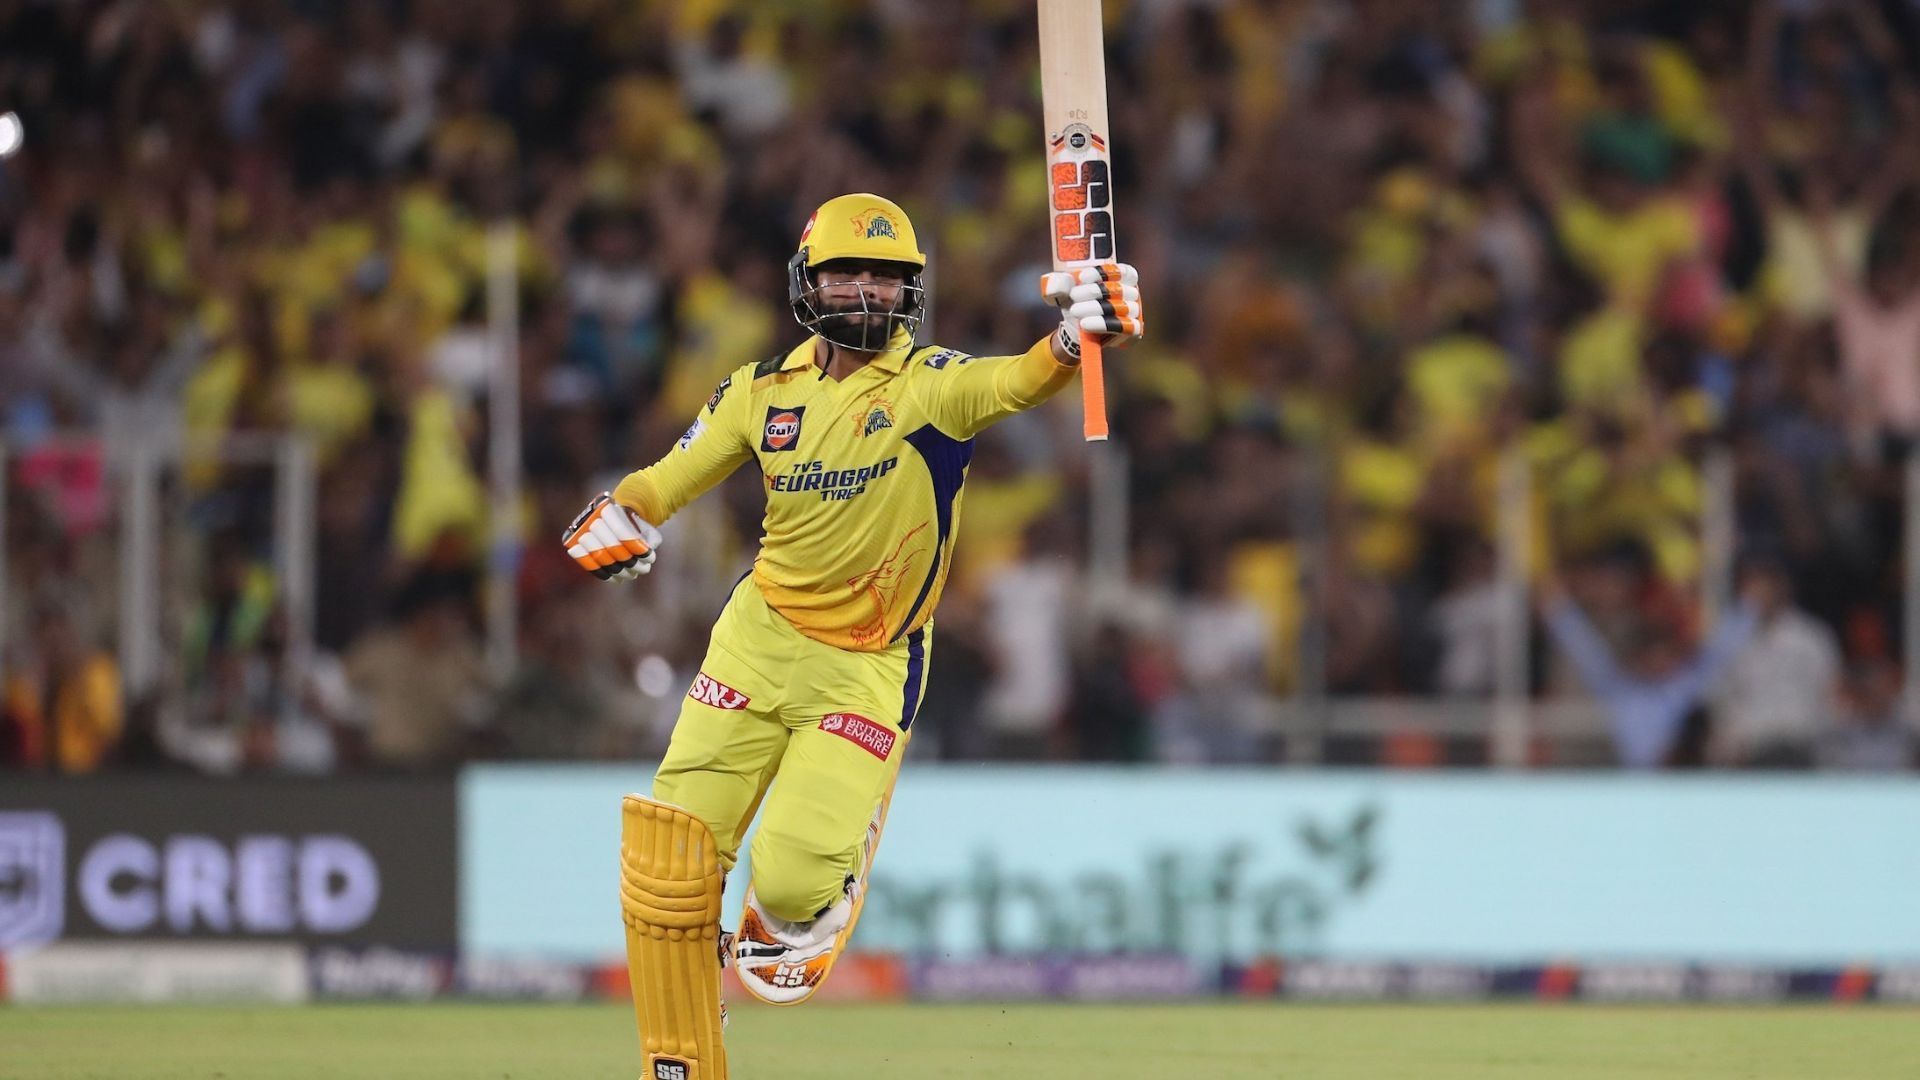 Ravindra Jadeja celebrated after smashing the last ball for a boundary and winning CSK the title (P.C.:iplt20.com)